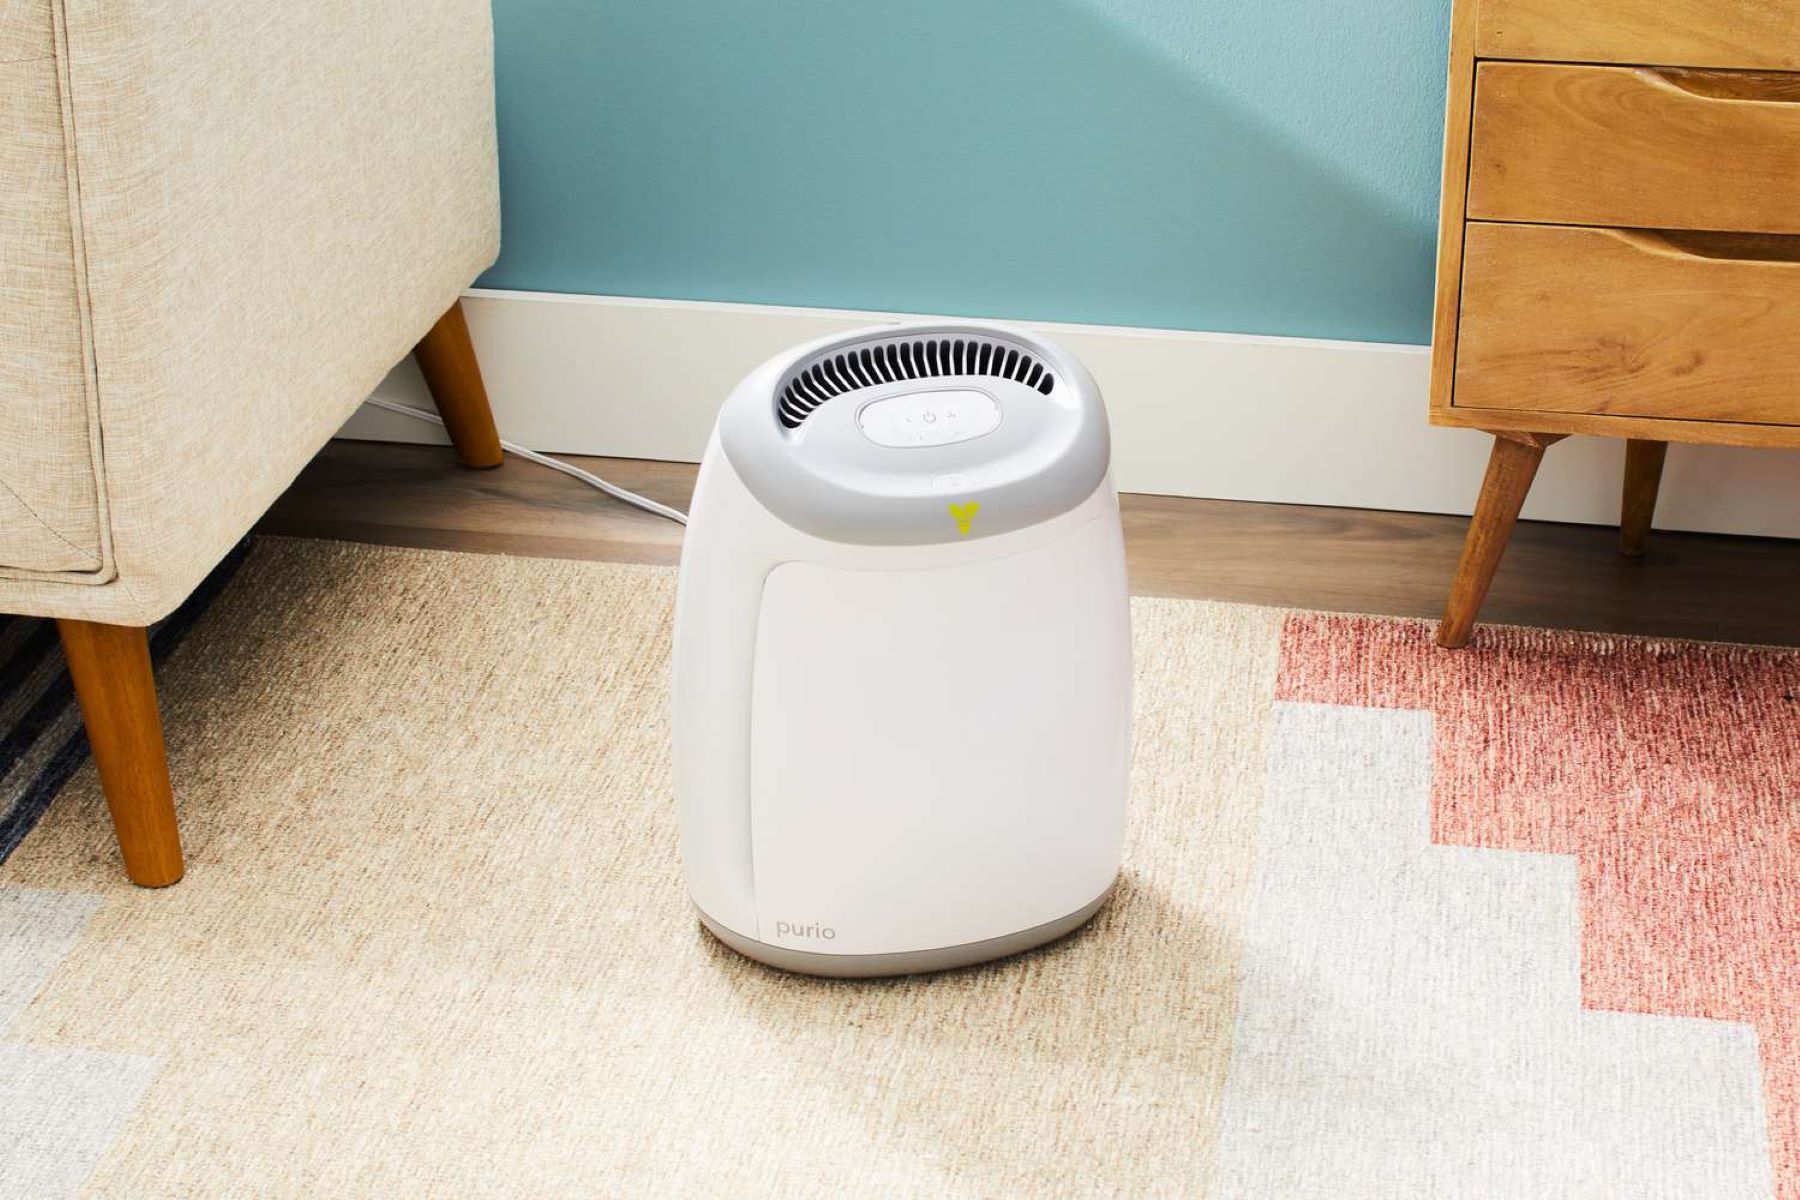 New Air Purifier Made Me Sick In Just One Hour!